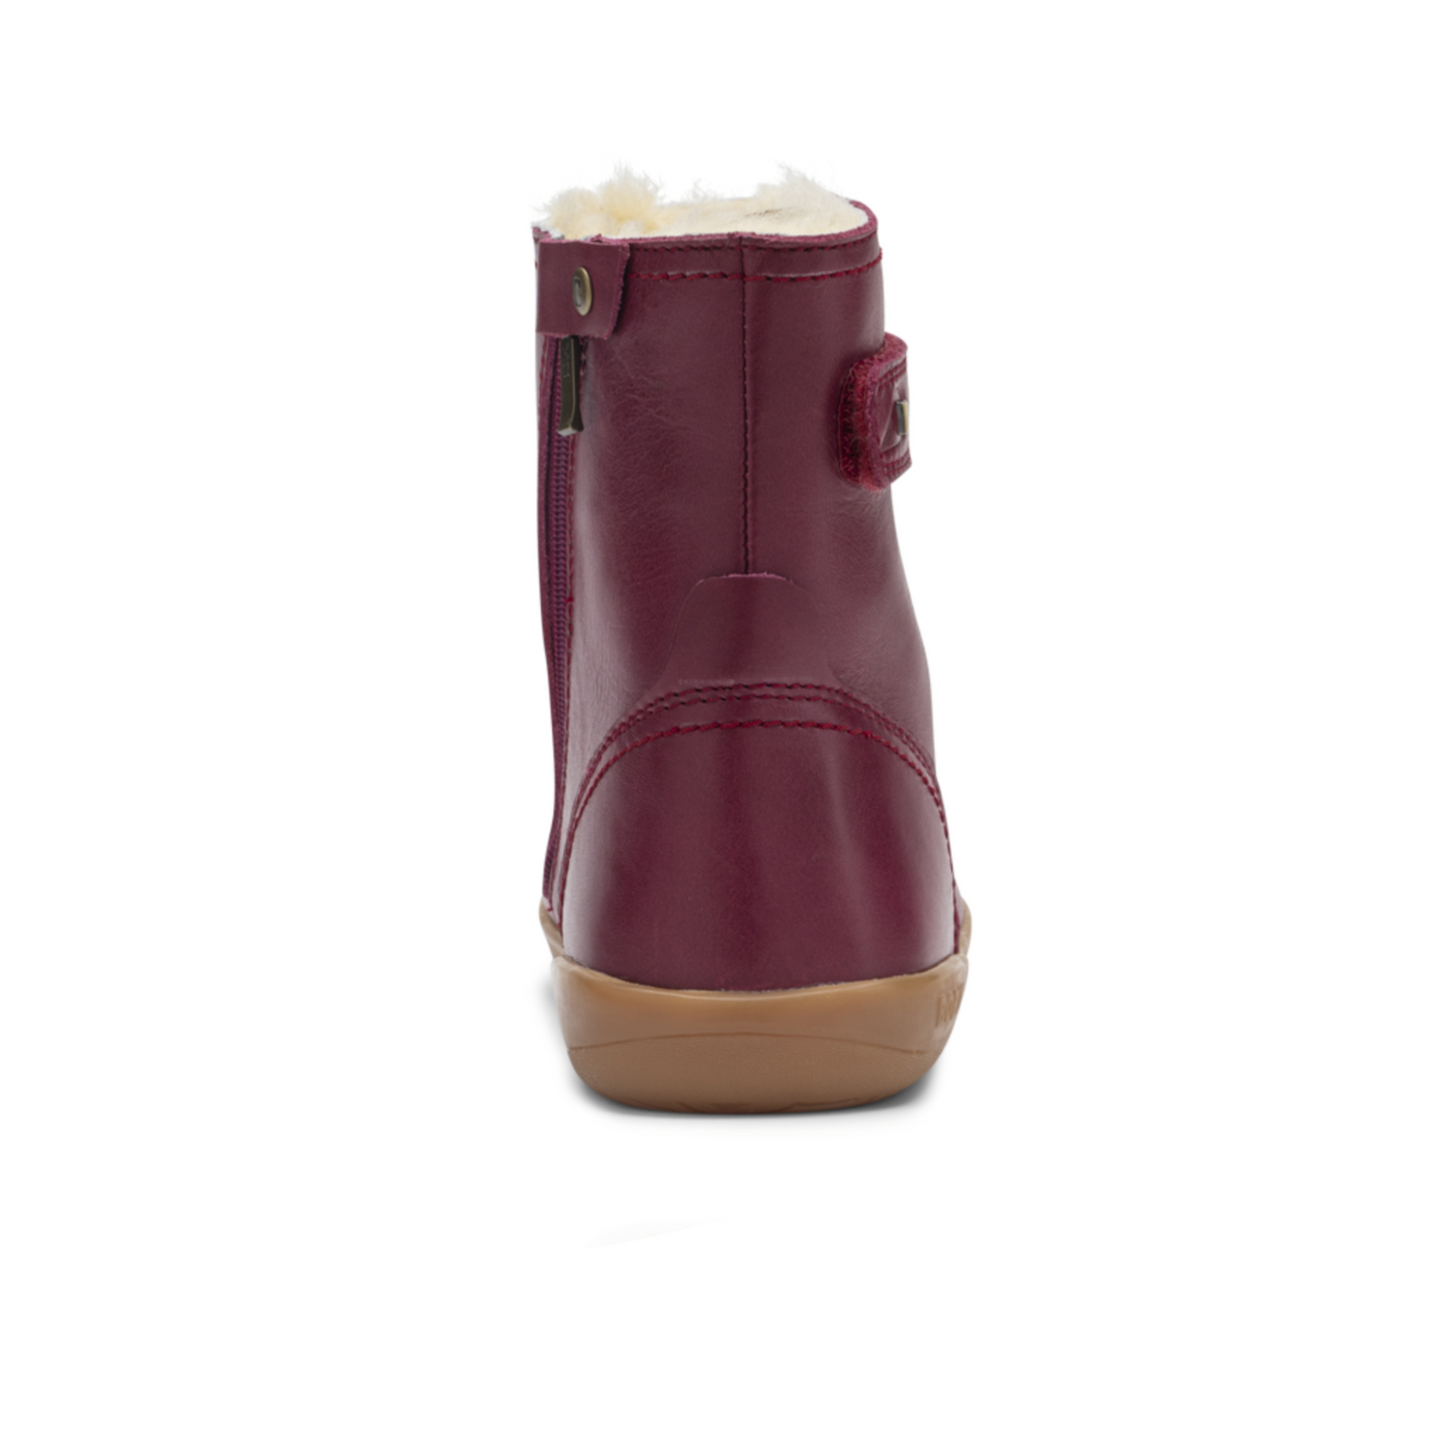 Bobux Tahoe Arctic Boysenberry Lined Boots